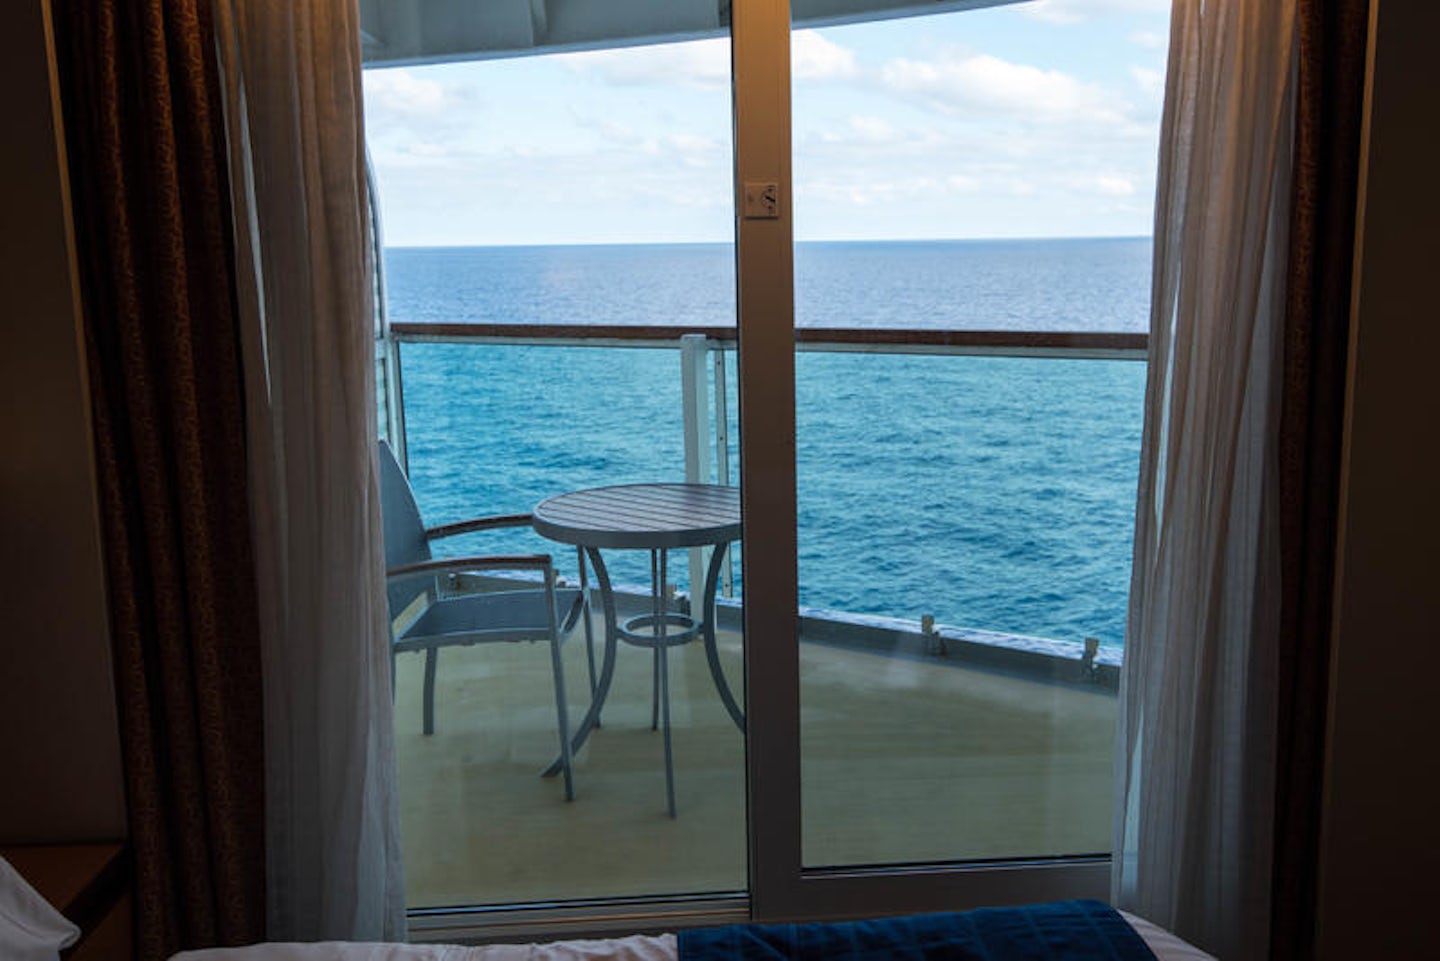 The Balcony Cabin on Brilliance of the Seas